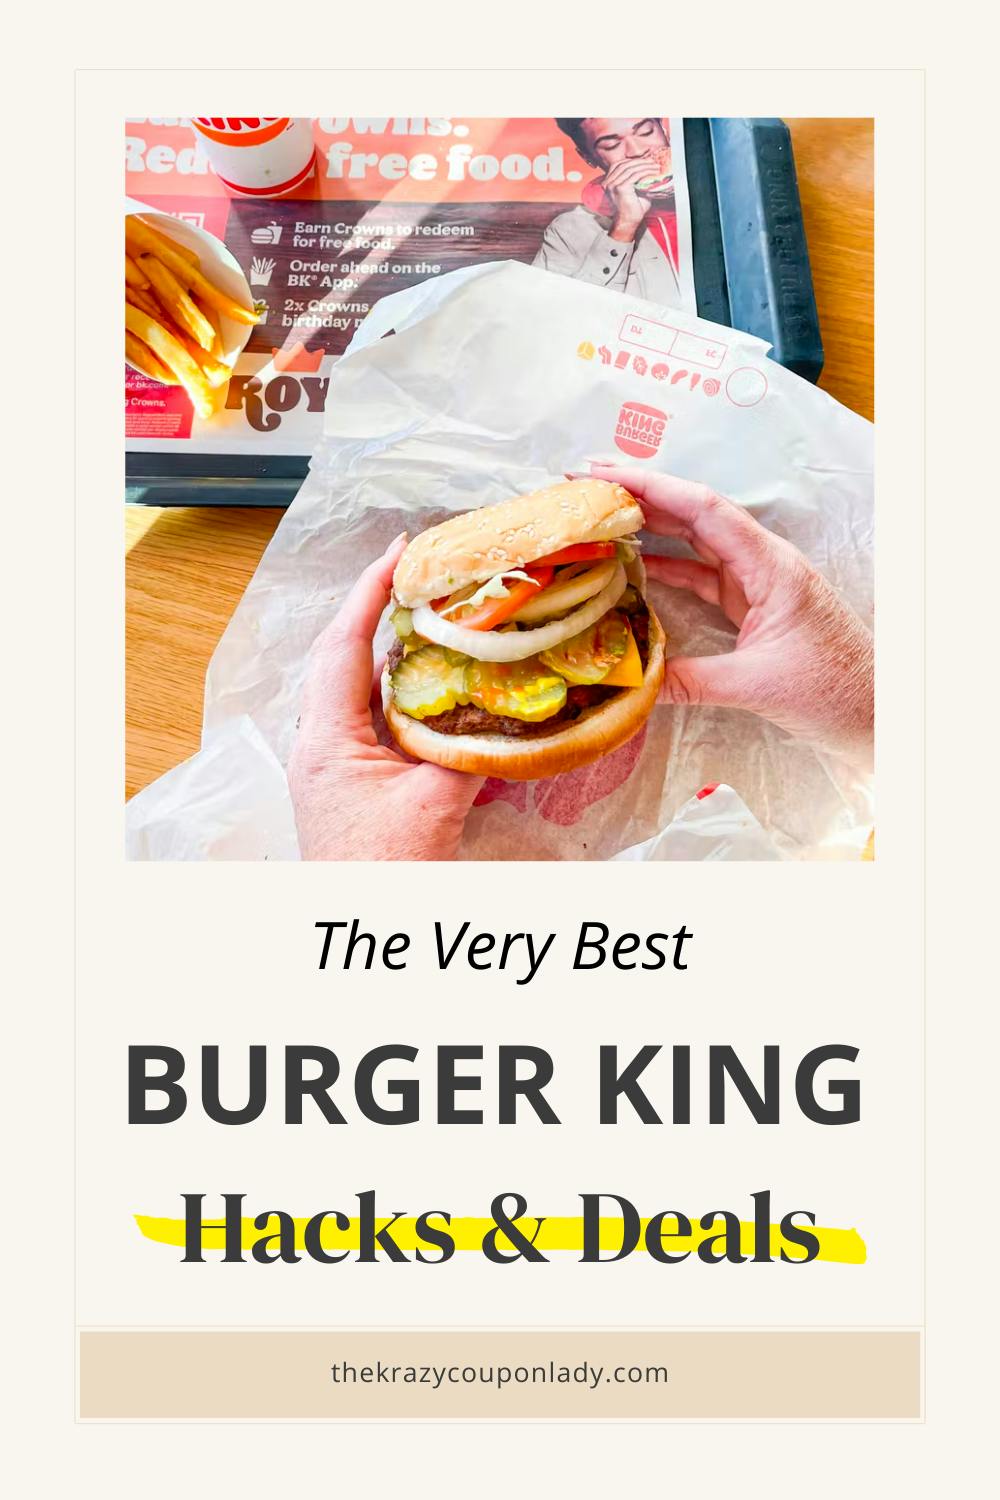 All Hail These 25 Burger King Deals & Tips for Free Whoppers